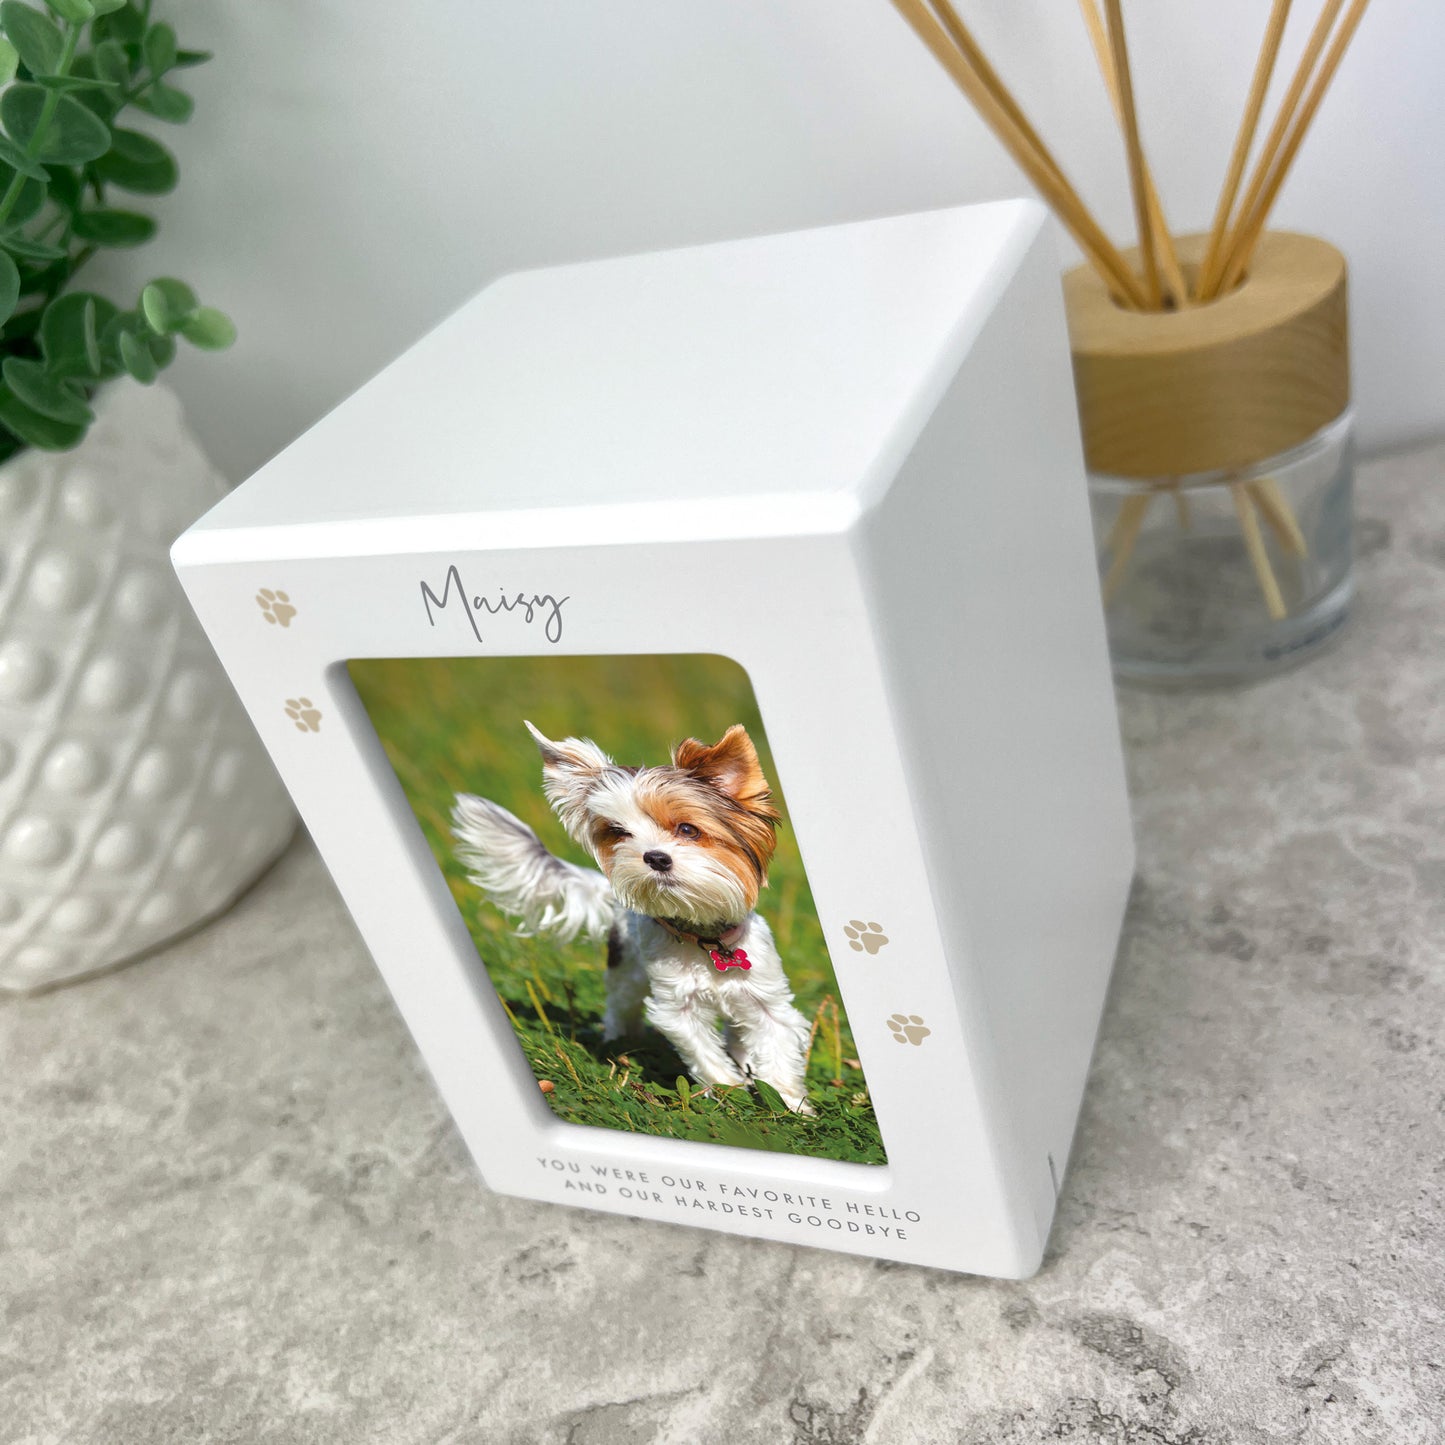 Personalised Neutral Paw Prints Cremation Urn For Pets Ashes Holds 9.5cm x 6cm Photo Portrait | 0.51 Litres